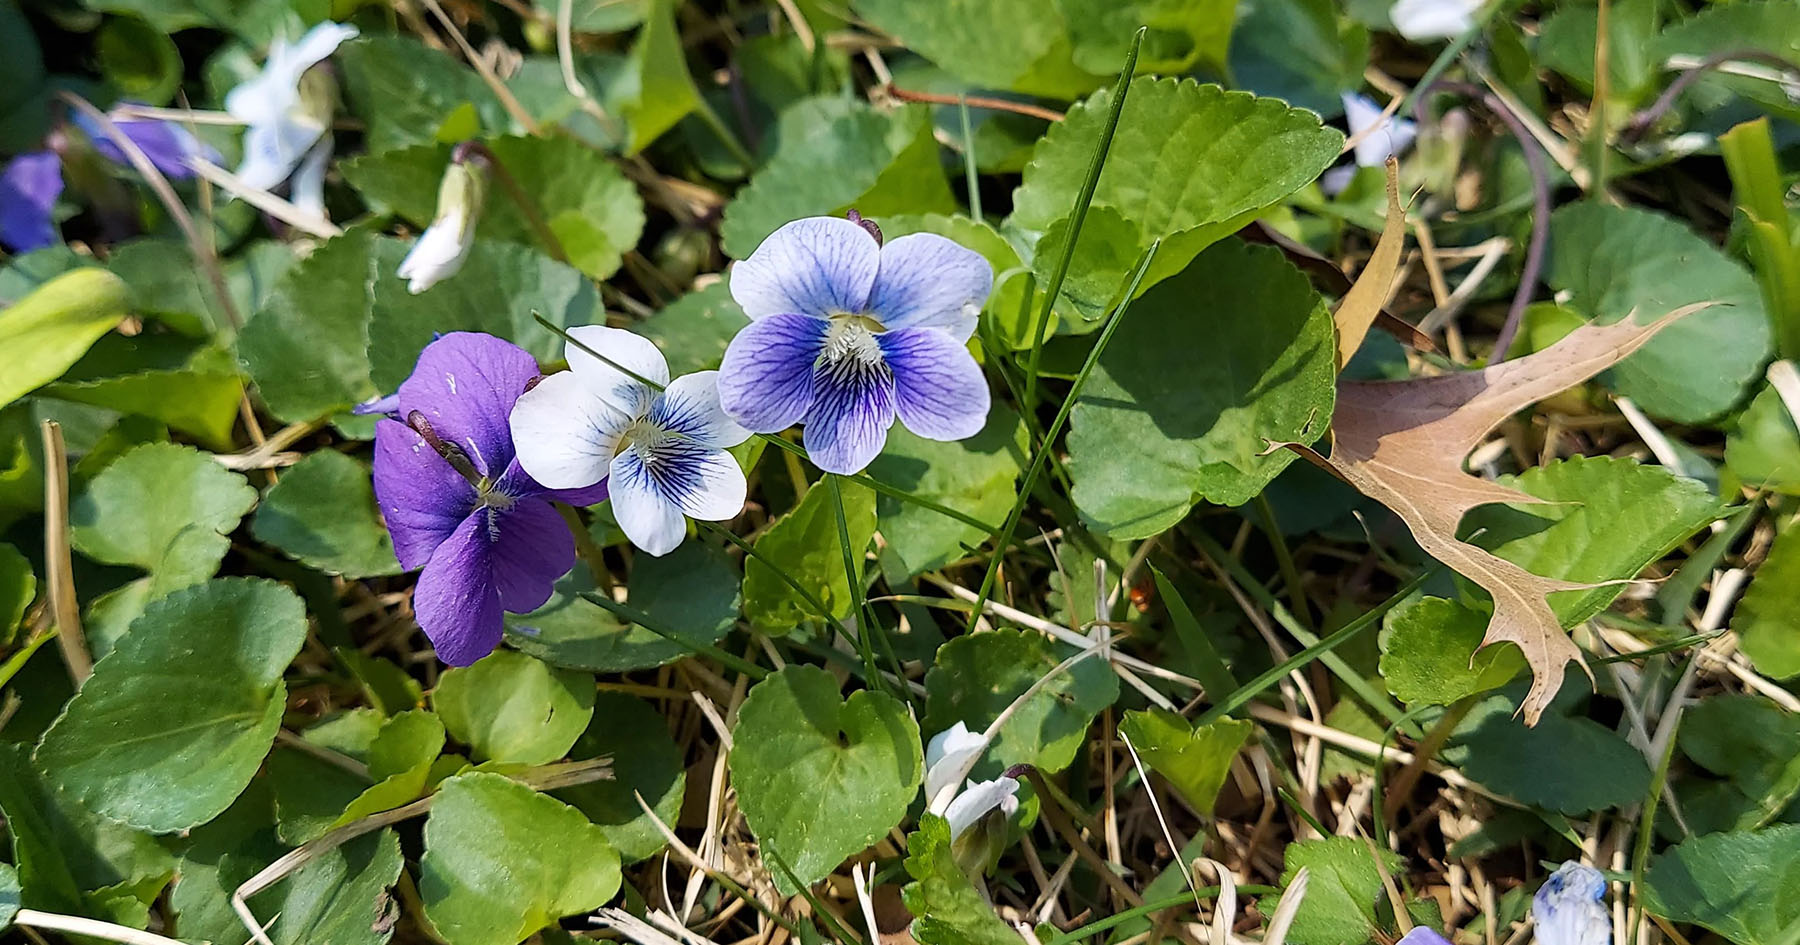 How To Control Wild Violet Weed In Your Lawn - Essential Home And Garden